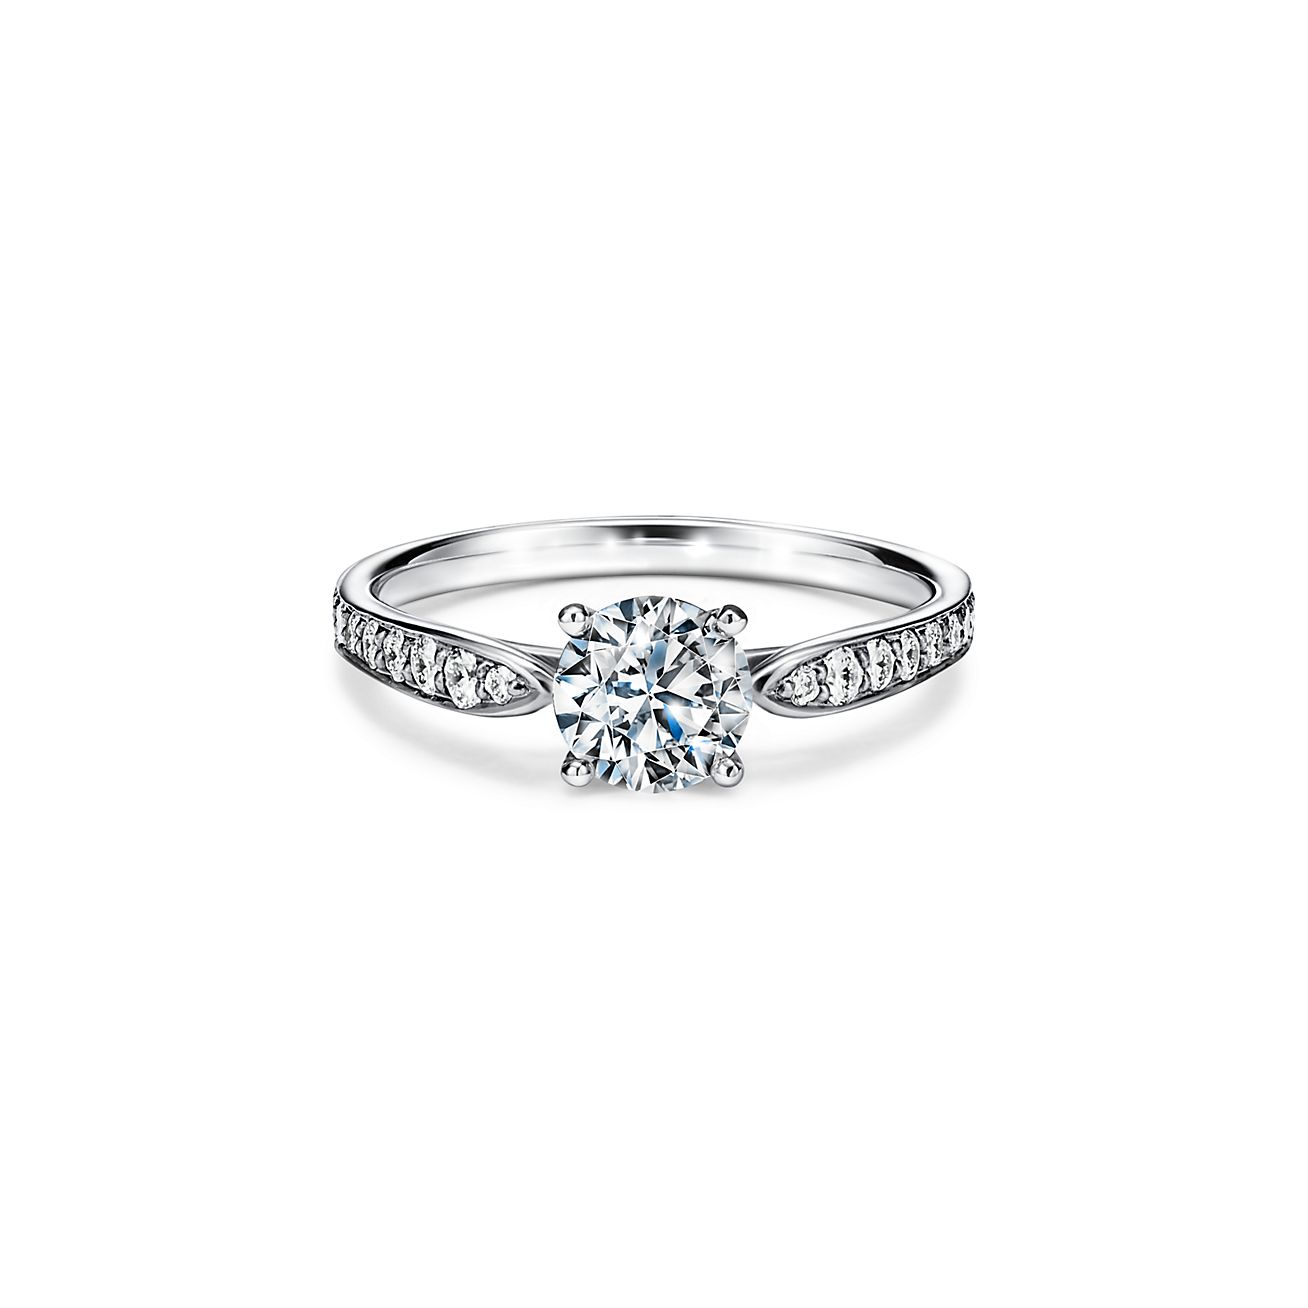 Tiffany Harmony® engagement ring with a 